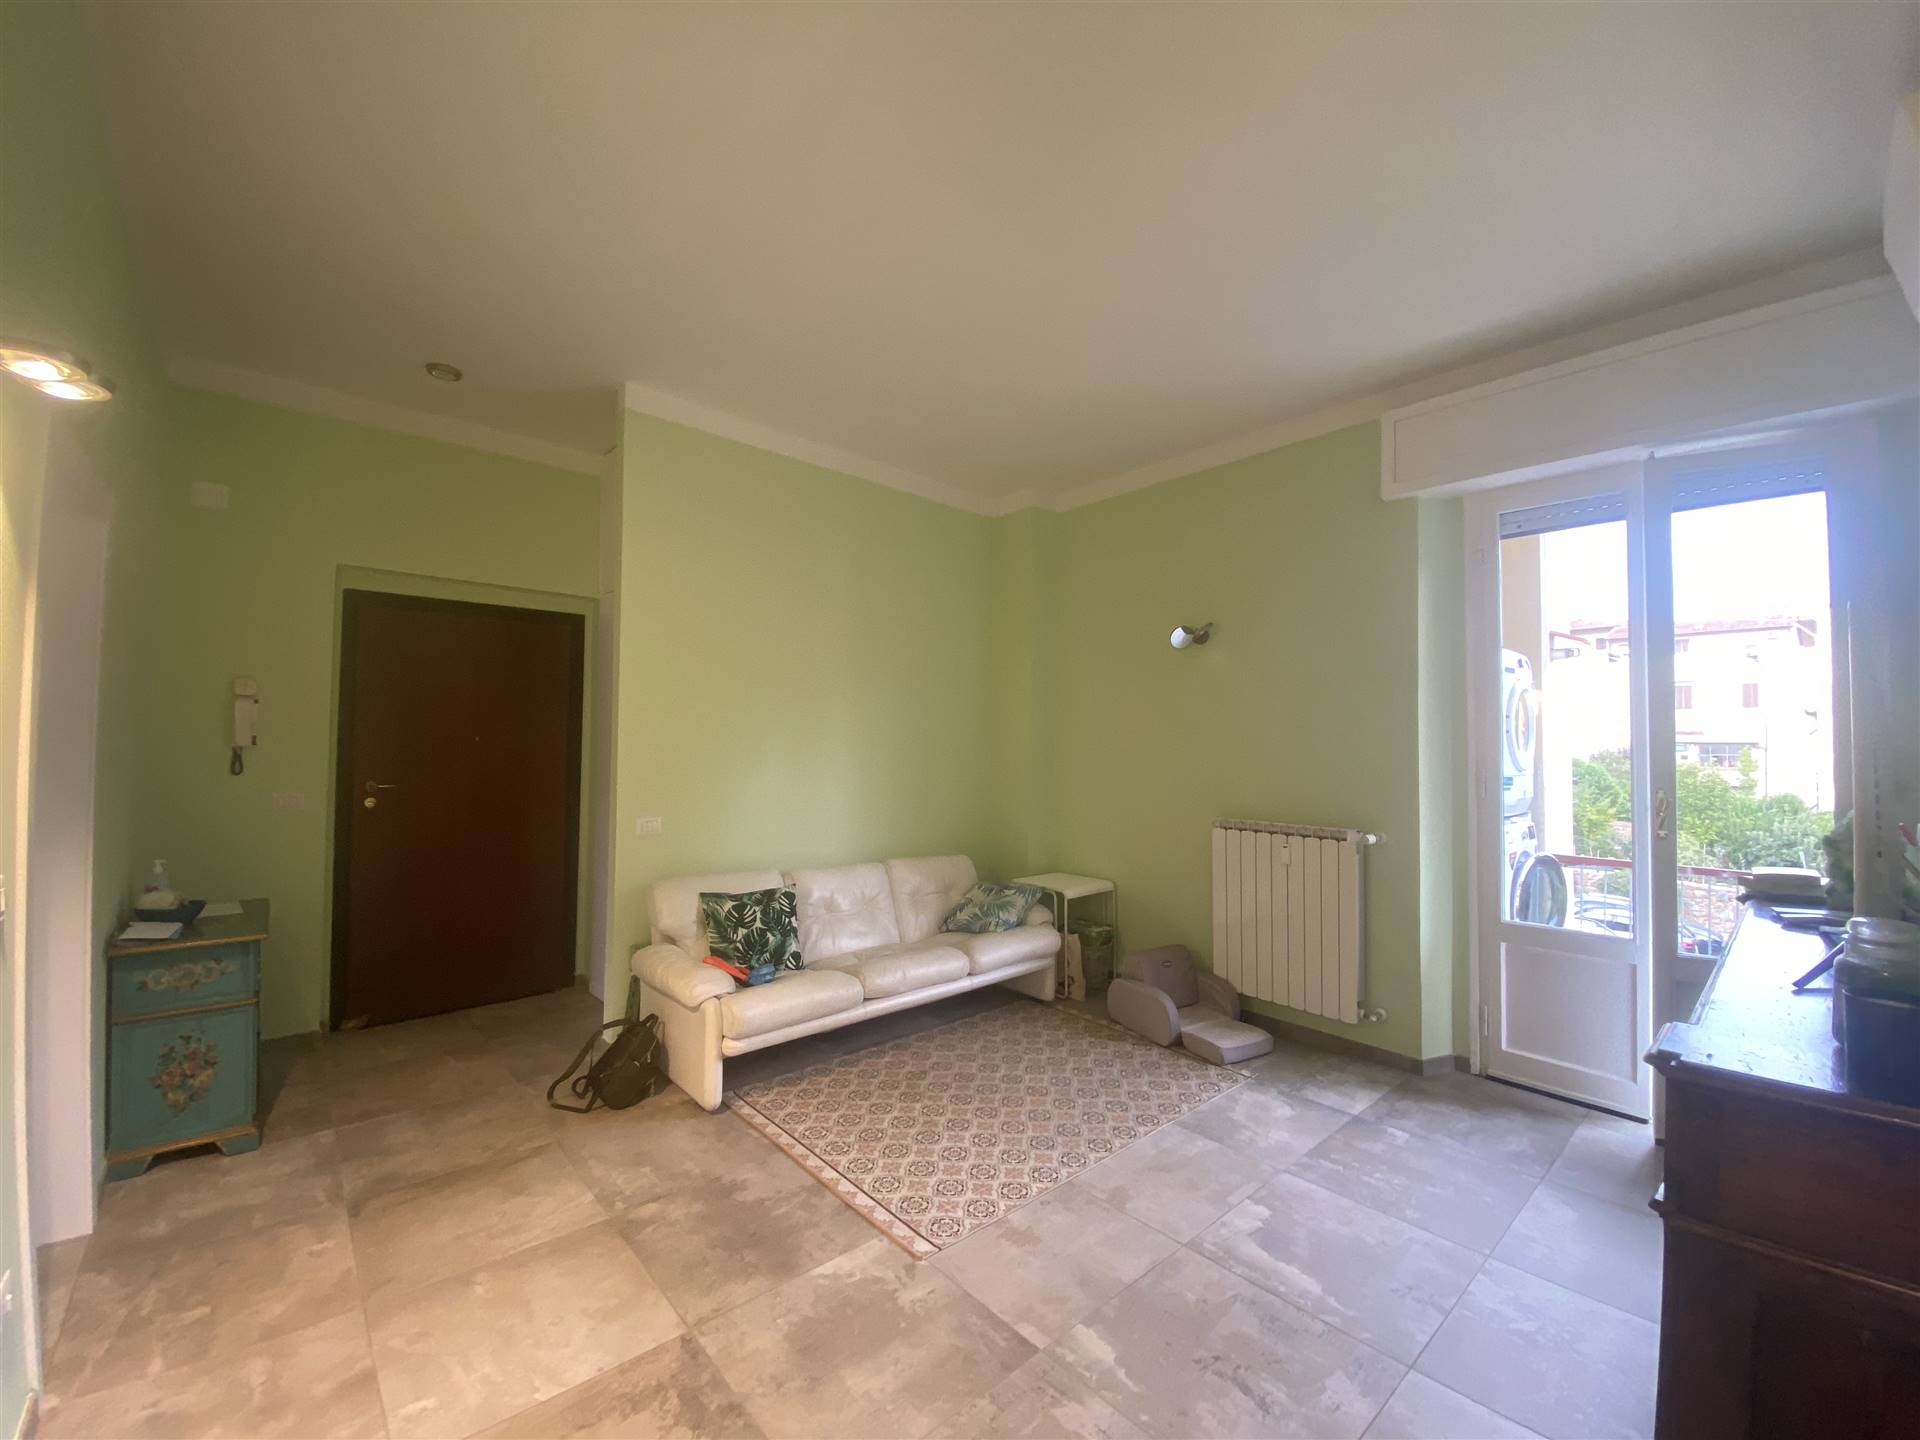 POGGIO IMPERIALE, FIRENZE, Apartment for sale of 85 Sq. mt., Restored, Heating Individual heating system, Energetic class: F, Epi: 175 kwh/m2 year, 